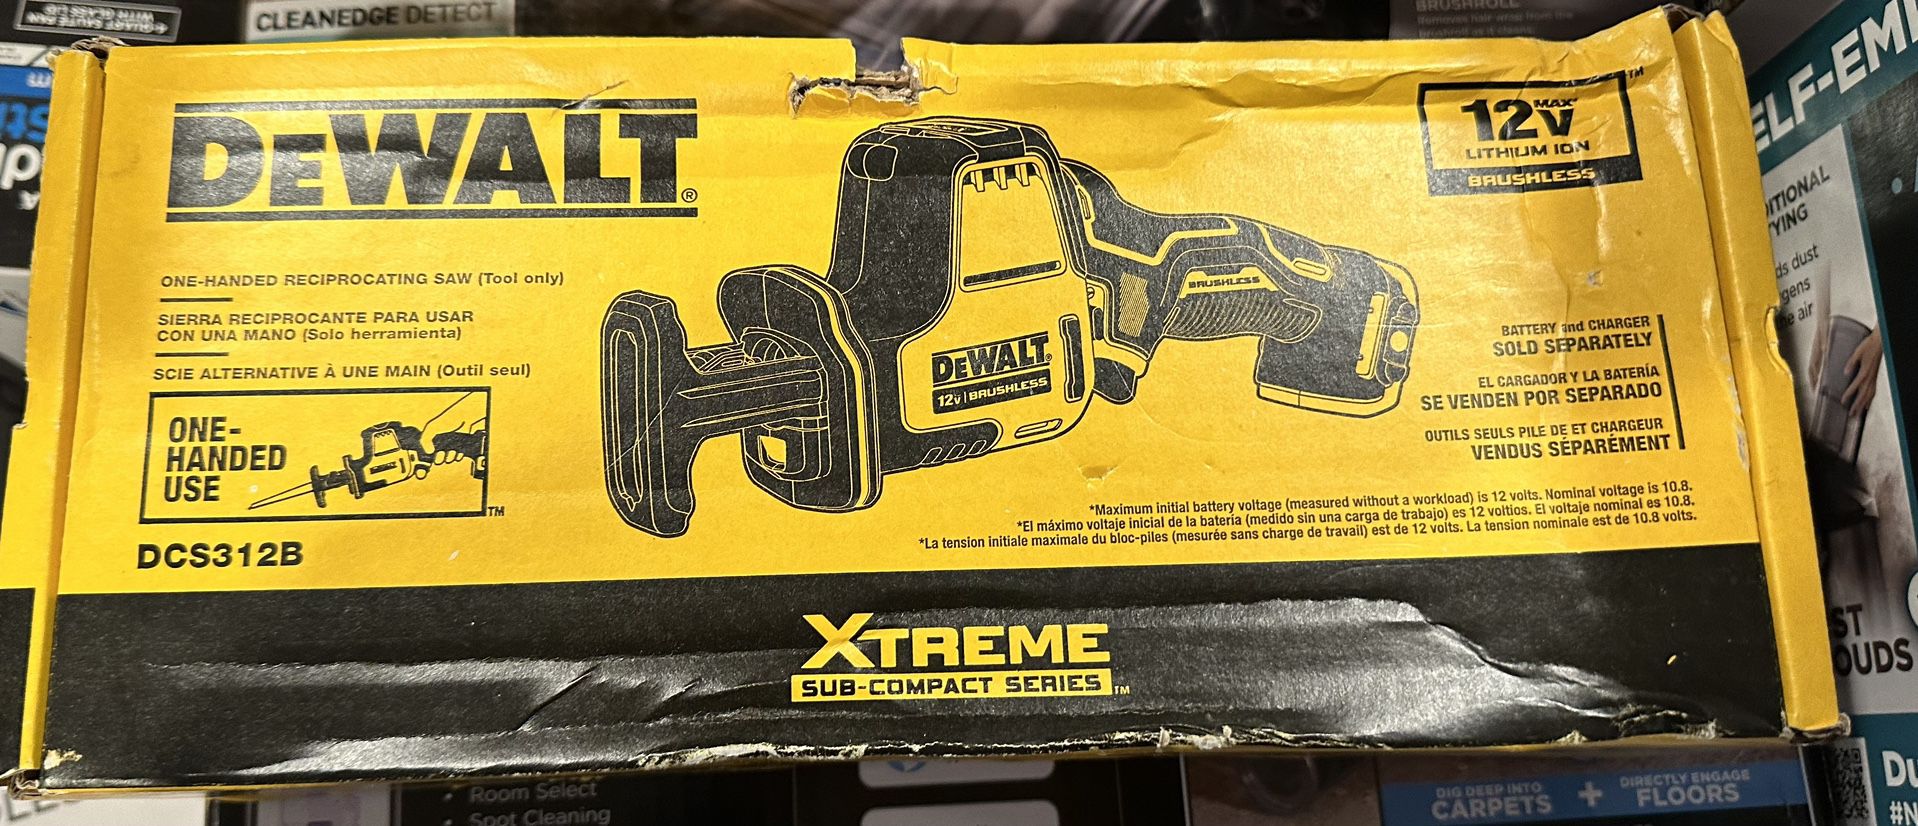 DEWALT XTREME 12-volt Max Variable Speed Brushless Cordless Reciprocating Saw (Bare Tool)